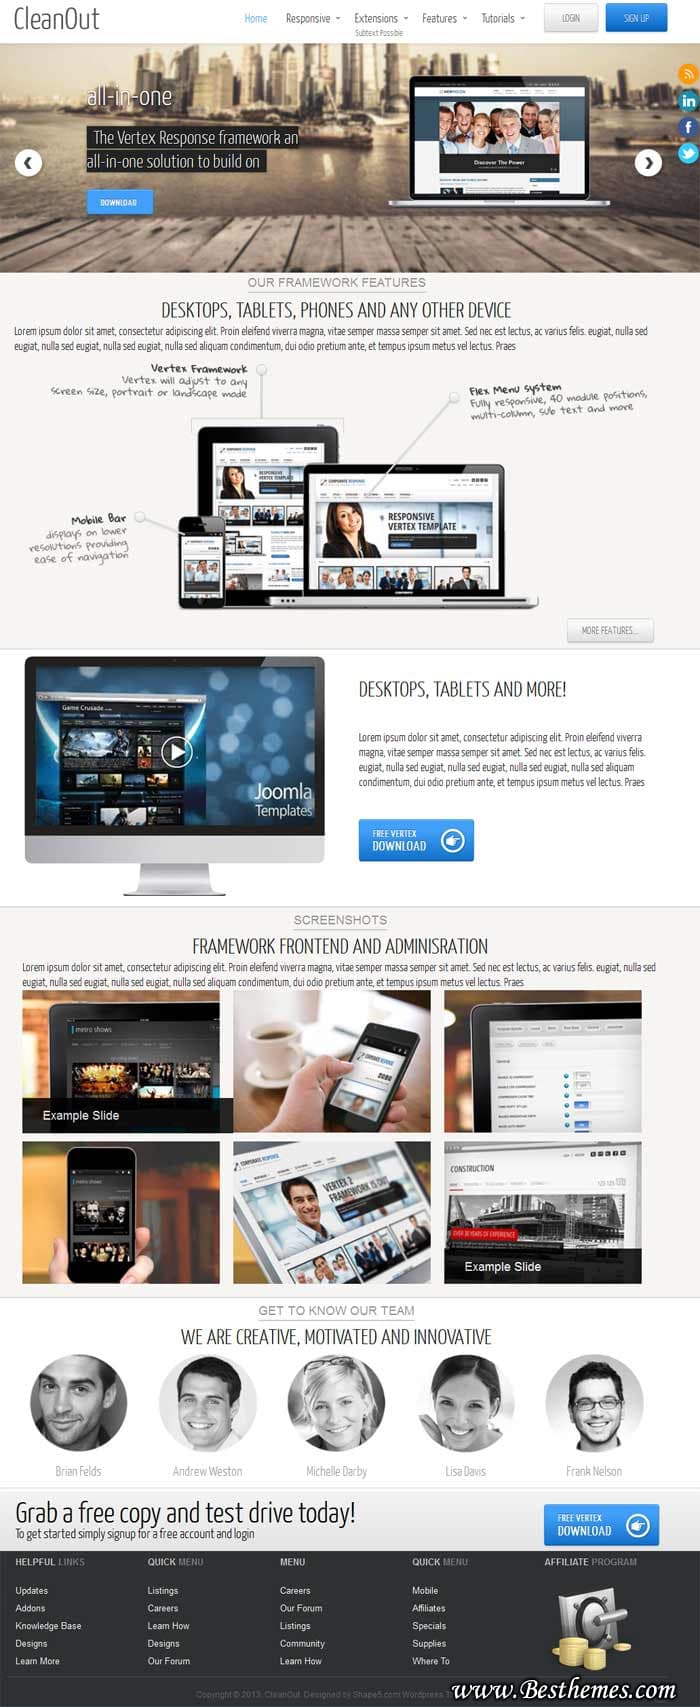 CleanOut Business Theme From Shape5